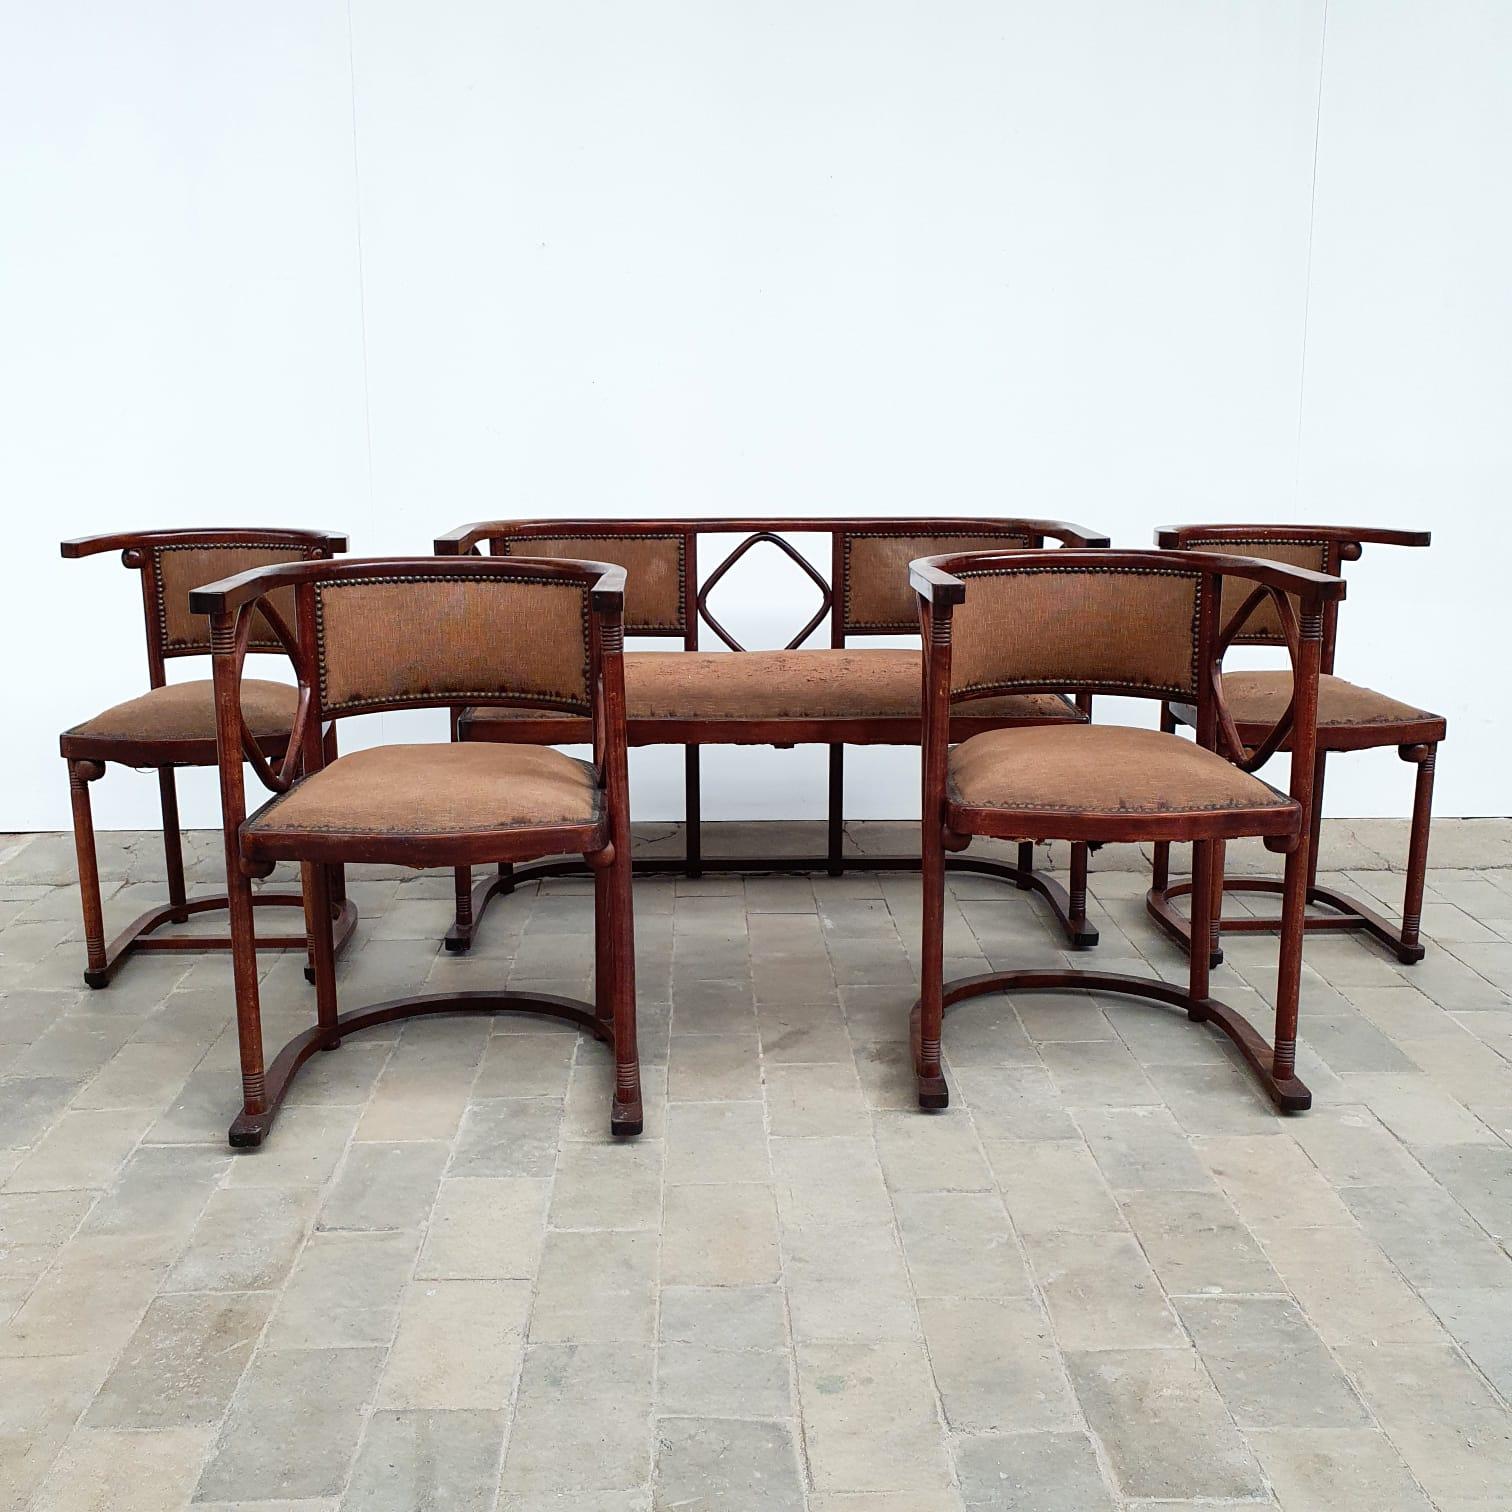 Rare Josef Hoffmann Set of 2 Armchairs, 2 Chairs and a Bench, 1907 For Sale 4